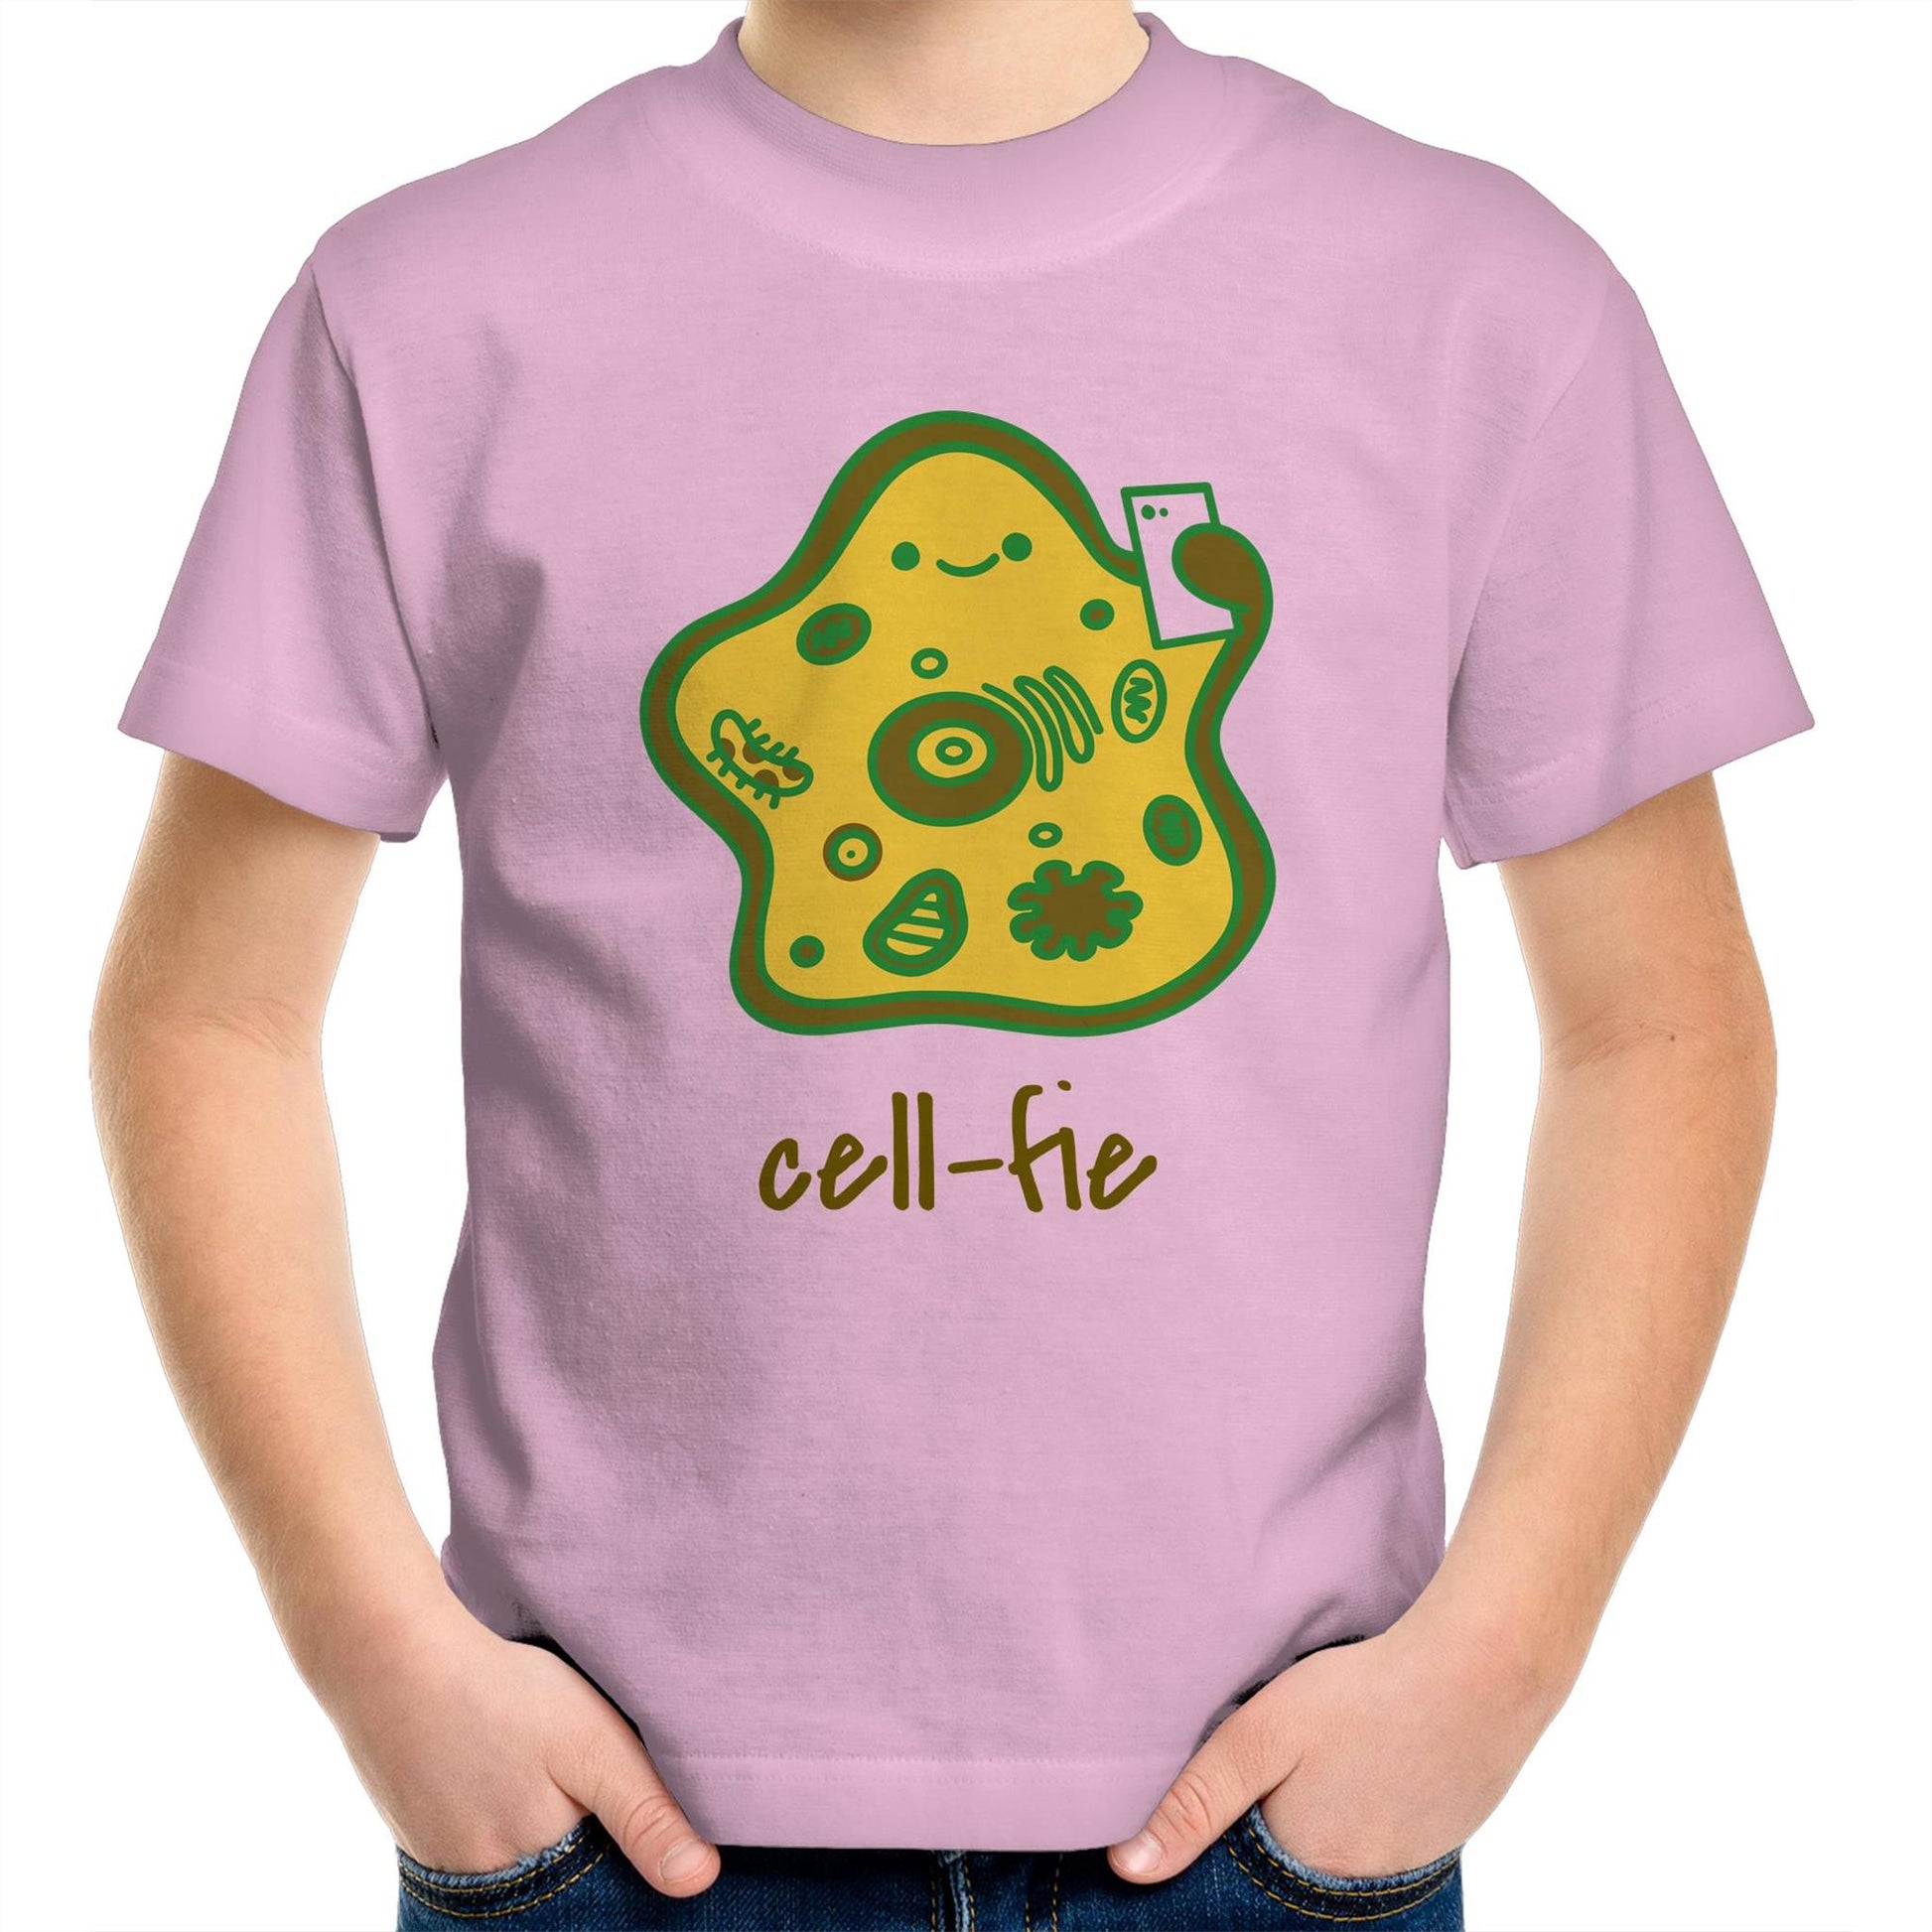 Cell-fie - Kids Youth Crew T-Shirt Pink Kids Youth T-shirt Science